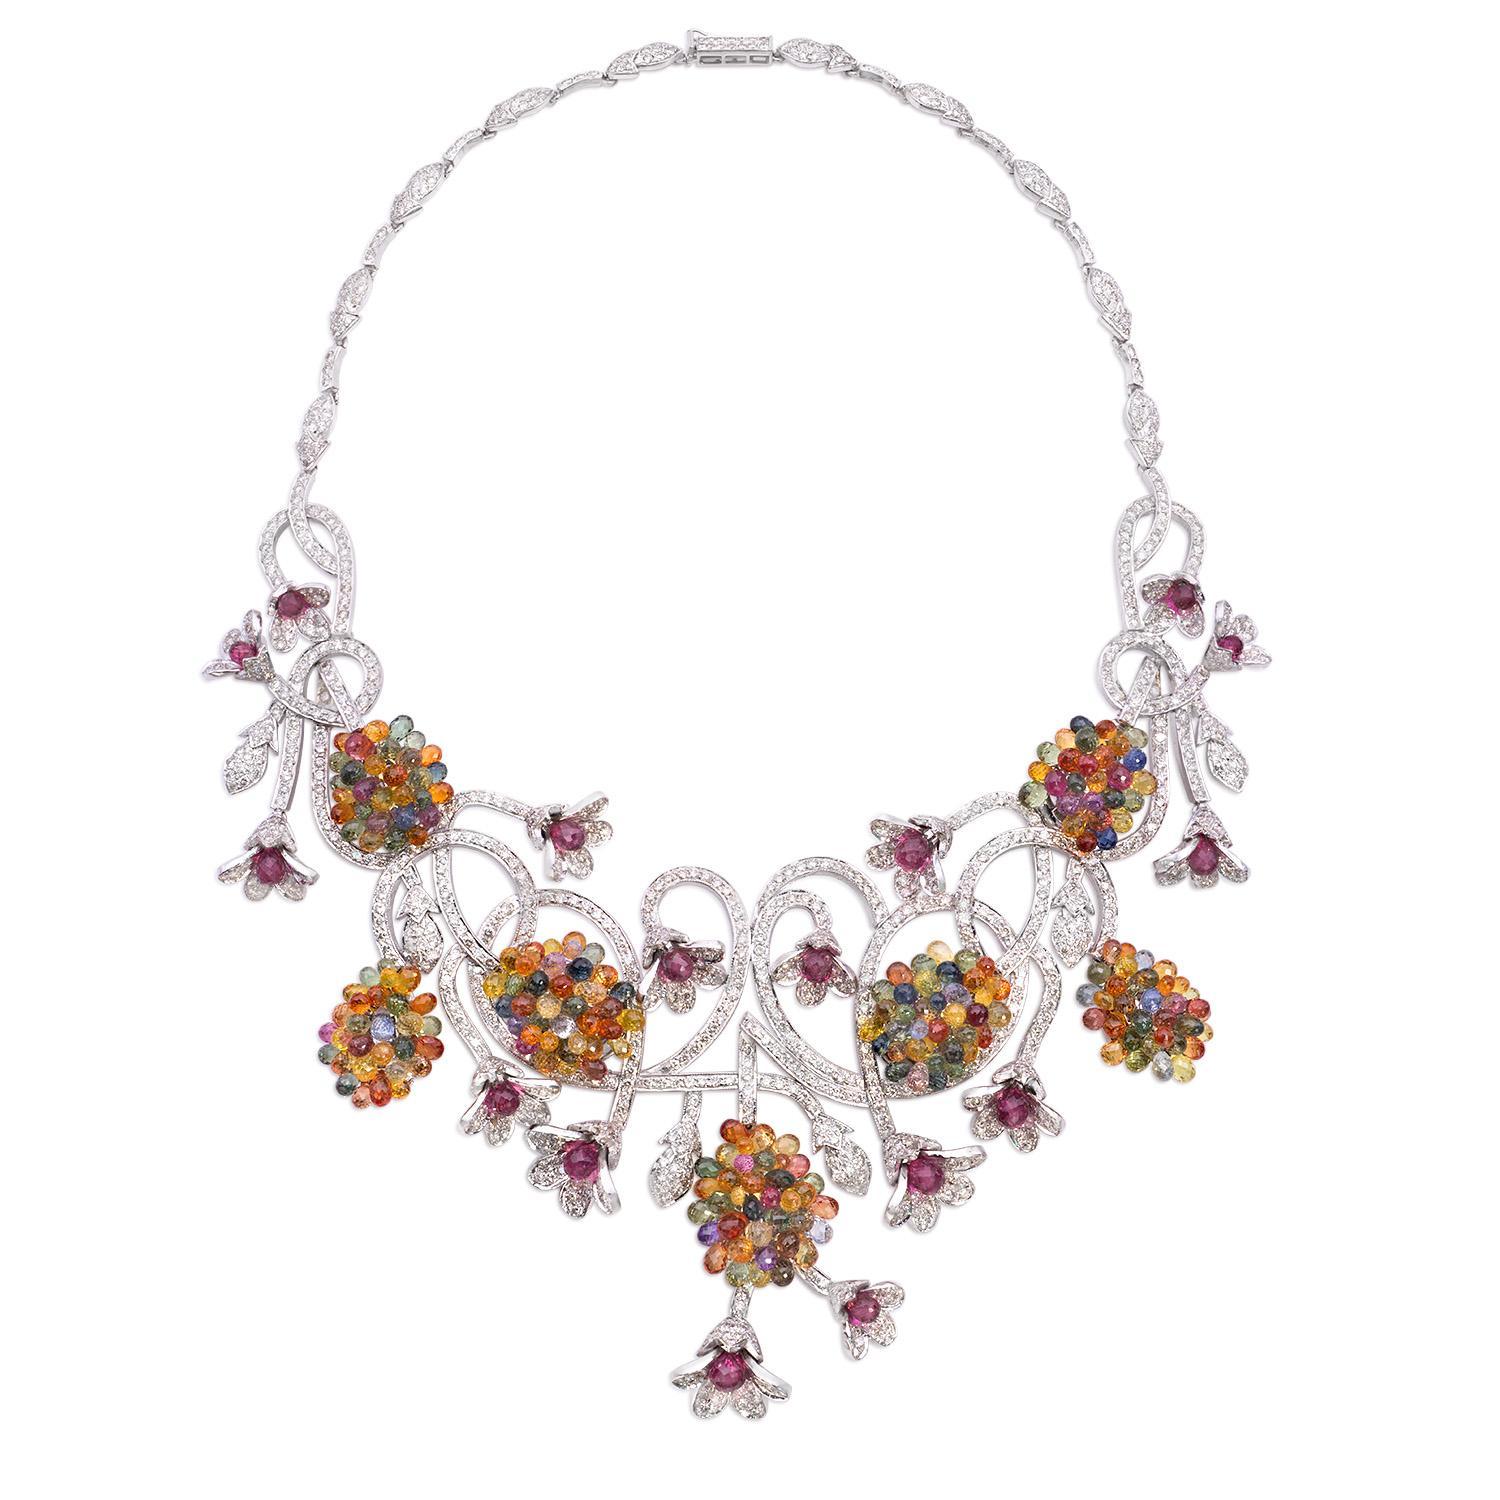 Introducing our exquisite Multi-Sapphire Necklace, a true work of art that celebrates the vibrant beauty of colored gemstones and the timeless allure of diamonds. This necklace is a testament to luxury and craftsmanship, meticulously crafted in 18K